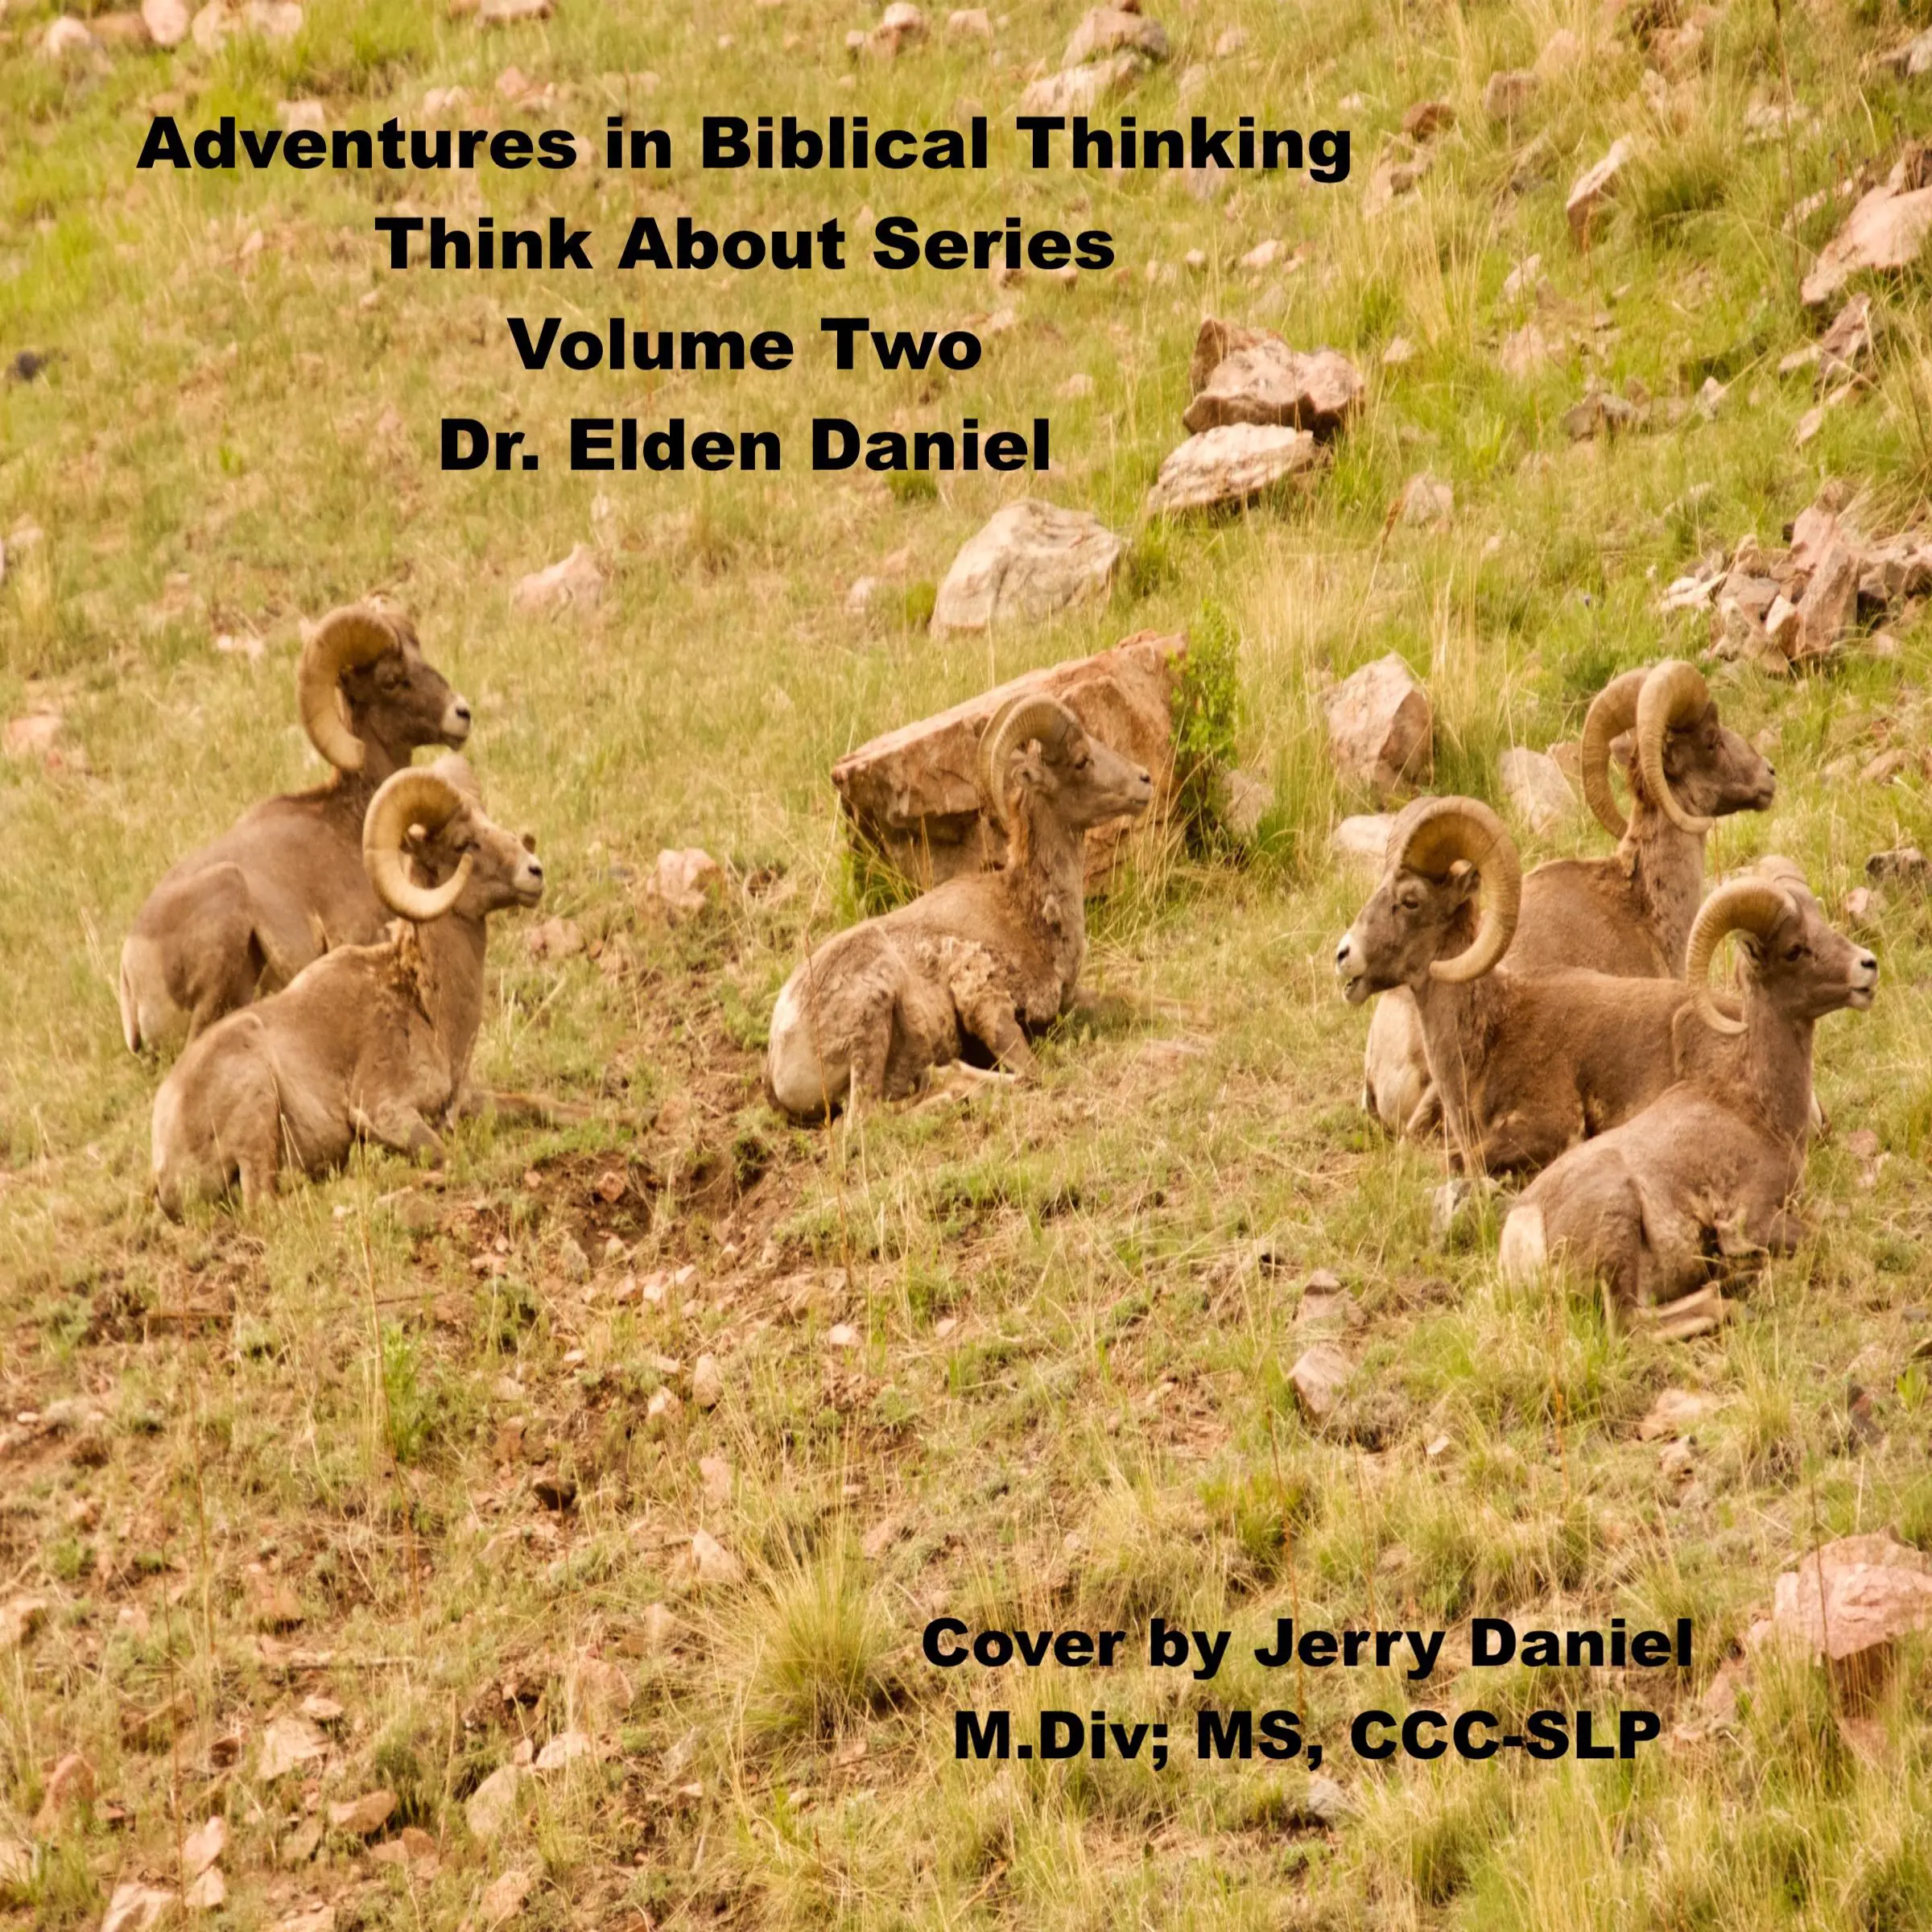 Adventures in Biblical Thinking-Think About Series-Volume 2 by Dr. Elden Daniel Audiobook